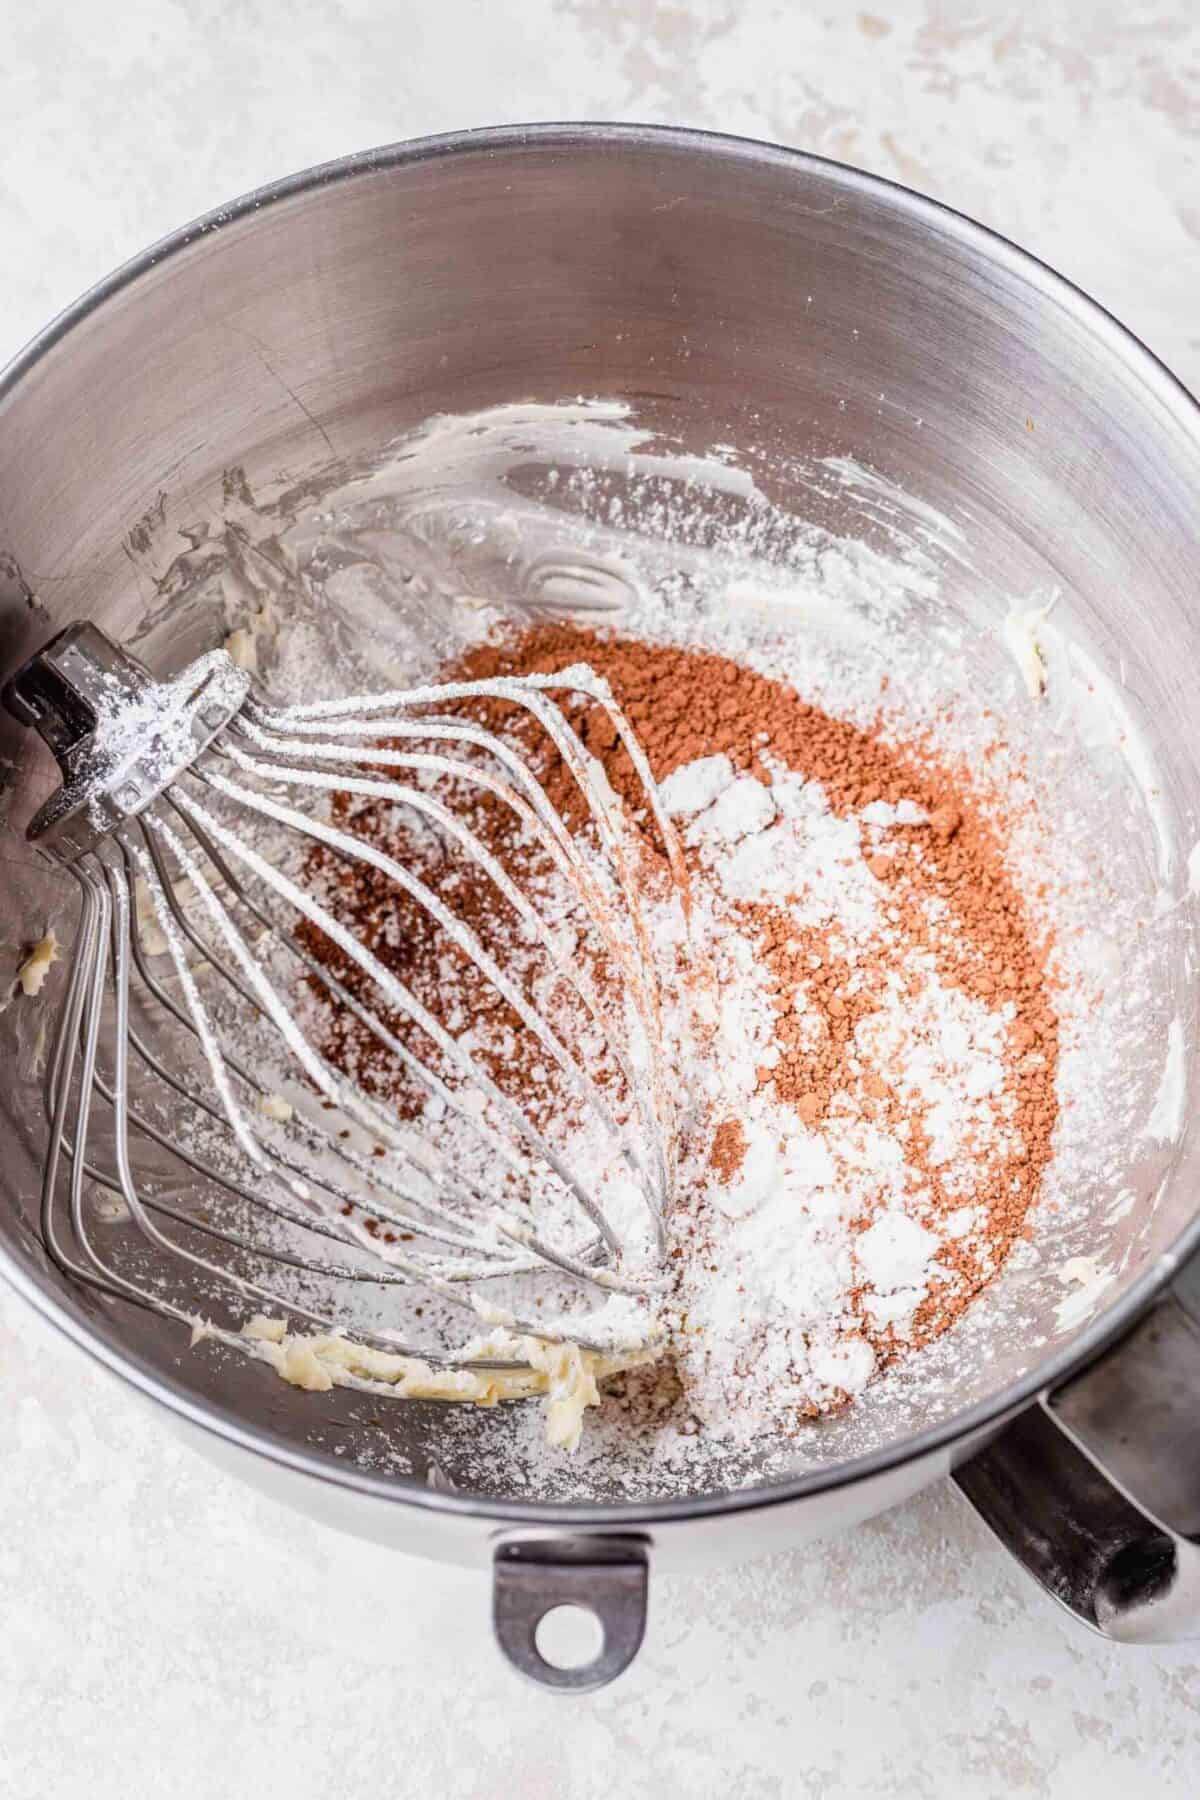 A stand mixer bowl filled with butter, sugar, cocoa powder, and cream, with a whisk attachment in the bowl